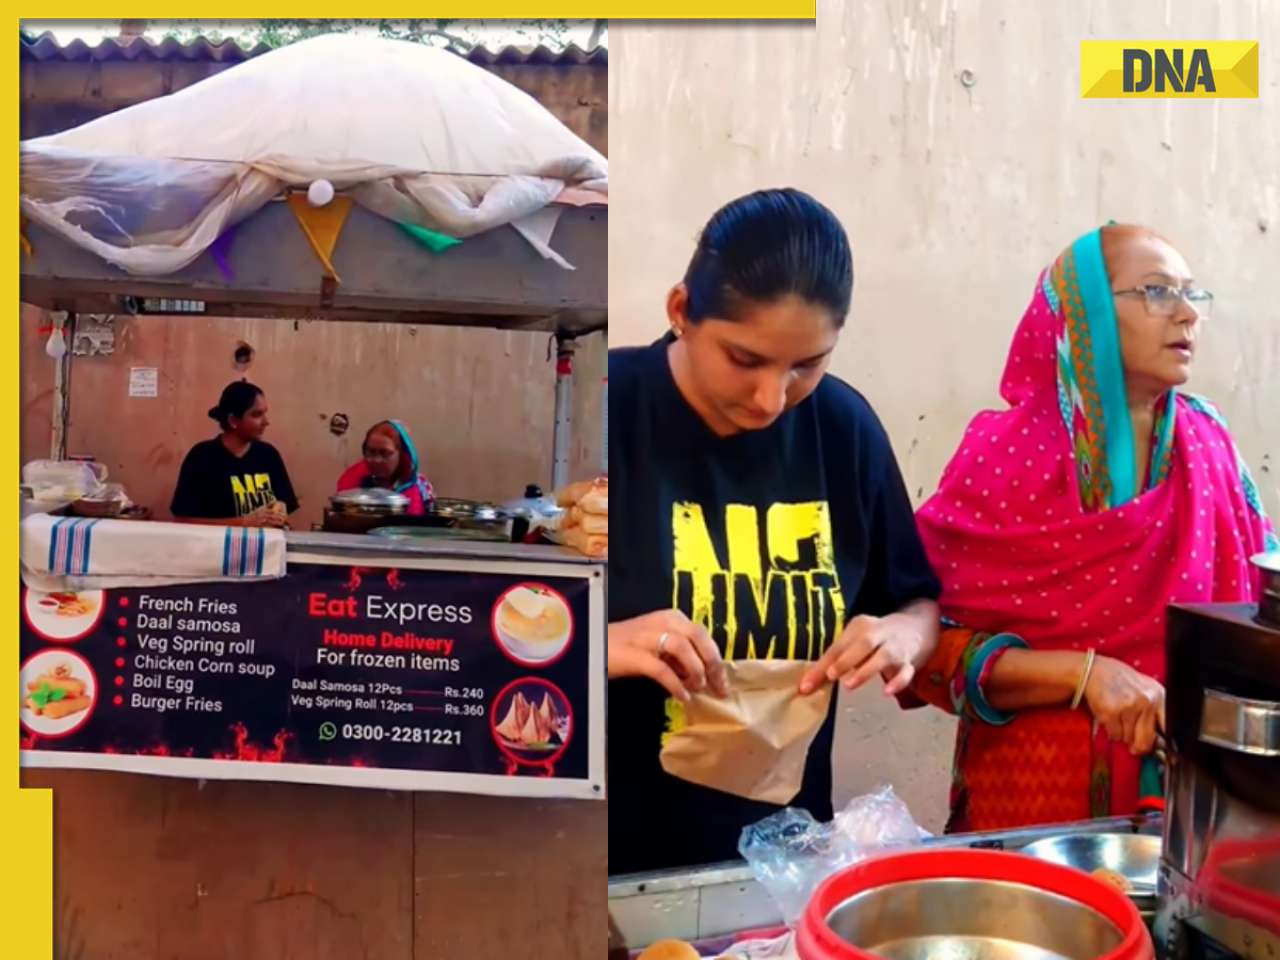 Viral video: Pakistani blogger shares love for Hindu family's food stall in Karachi, internet reacts 